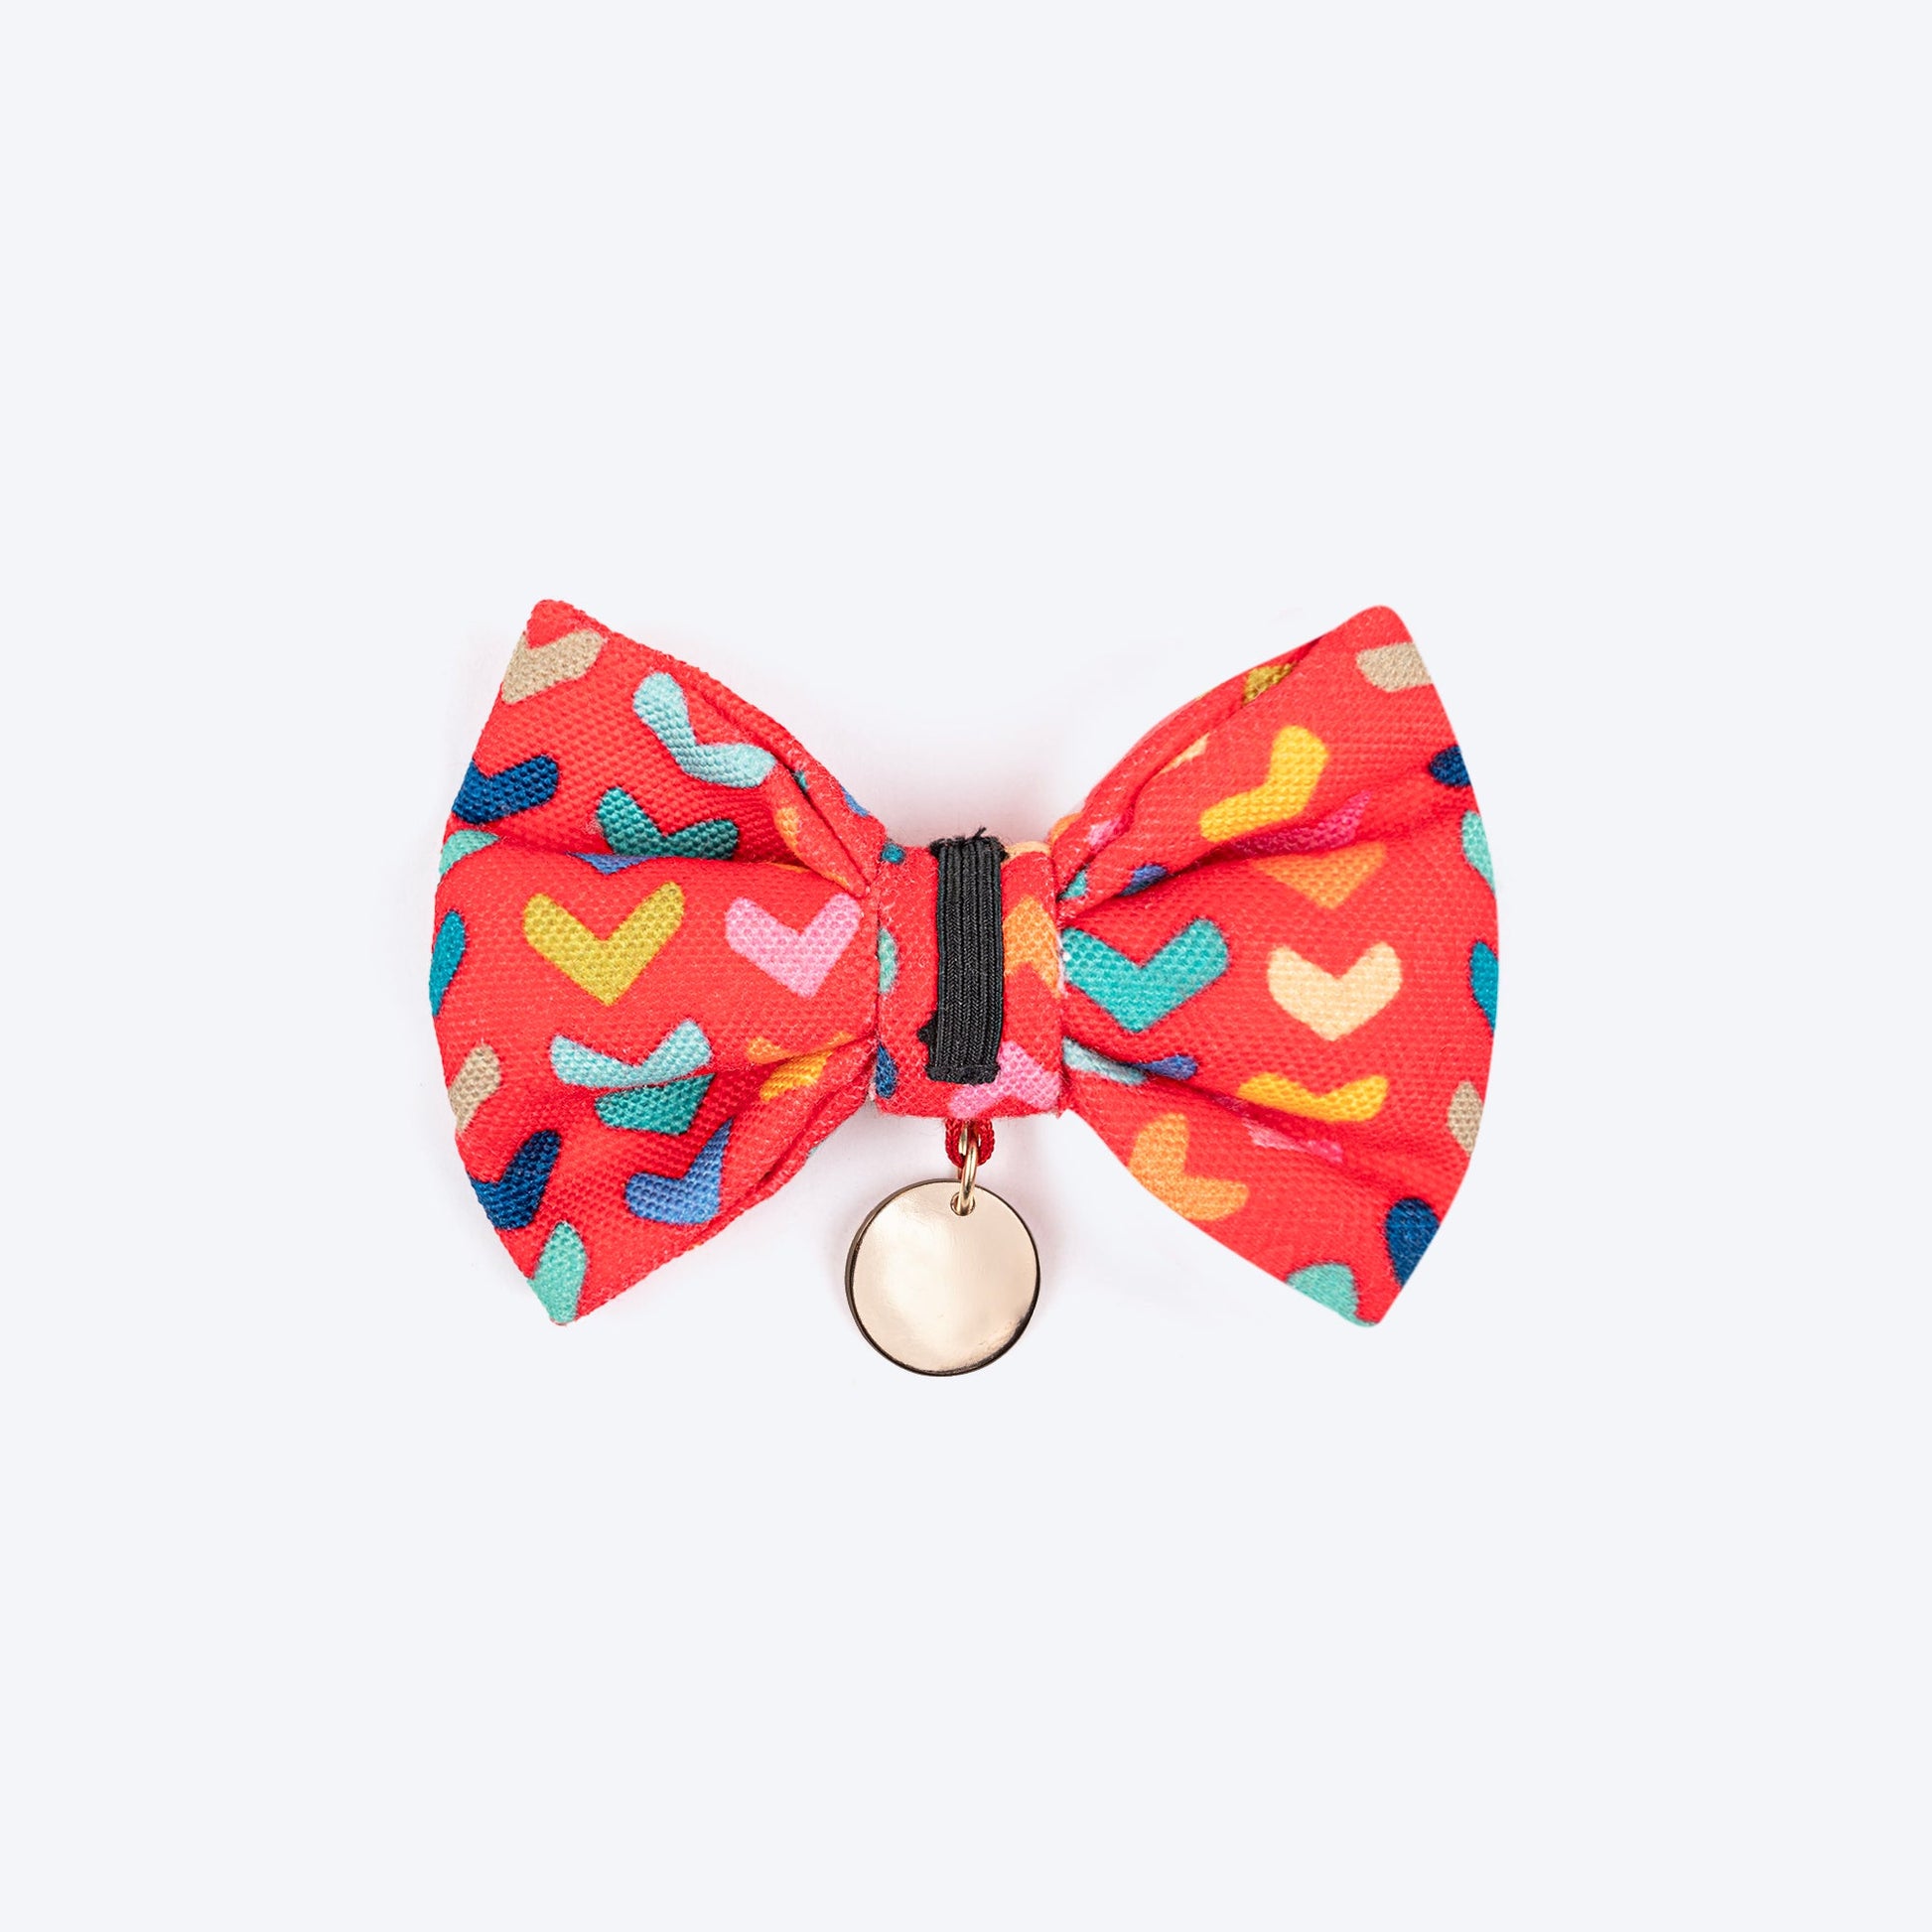 HUFT Heart to Heart Printed Bow Tie for Small Dog - Red - Heads Up For Tails